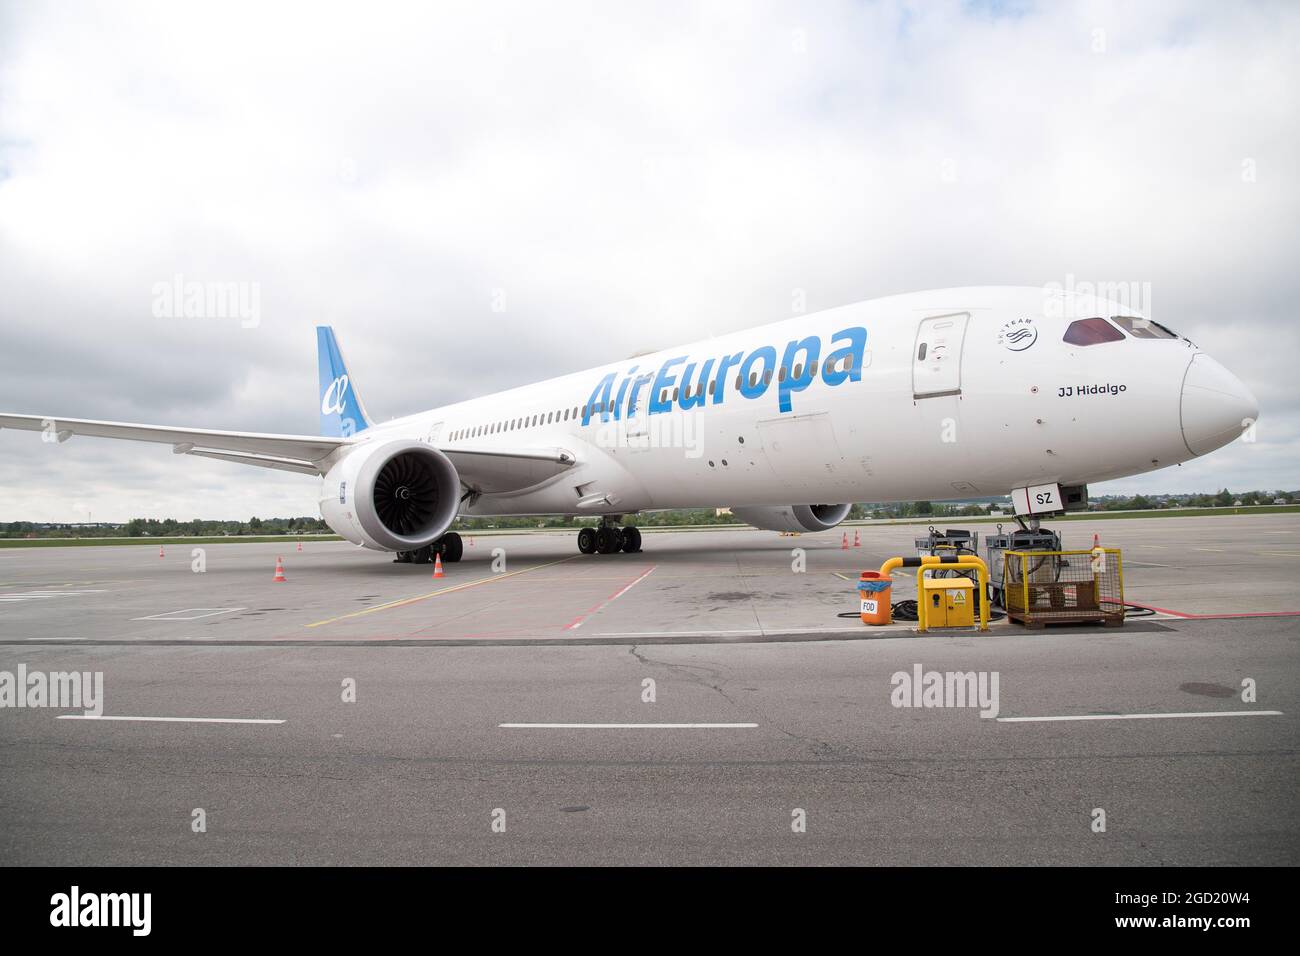 Boeing 787 Dreamliner of Air Europa in Gdansk, Poland. May 26th 2021 © Wojciech Strozyk / Alamy Stock Photo *** Local Caption *** Stock Photo